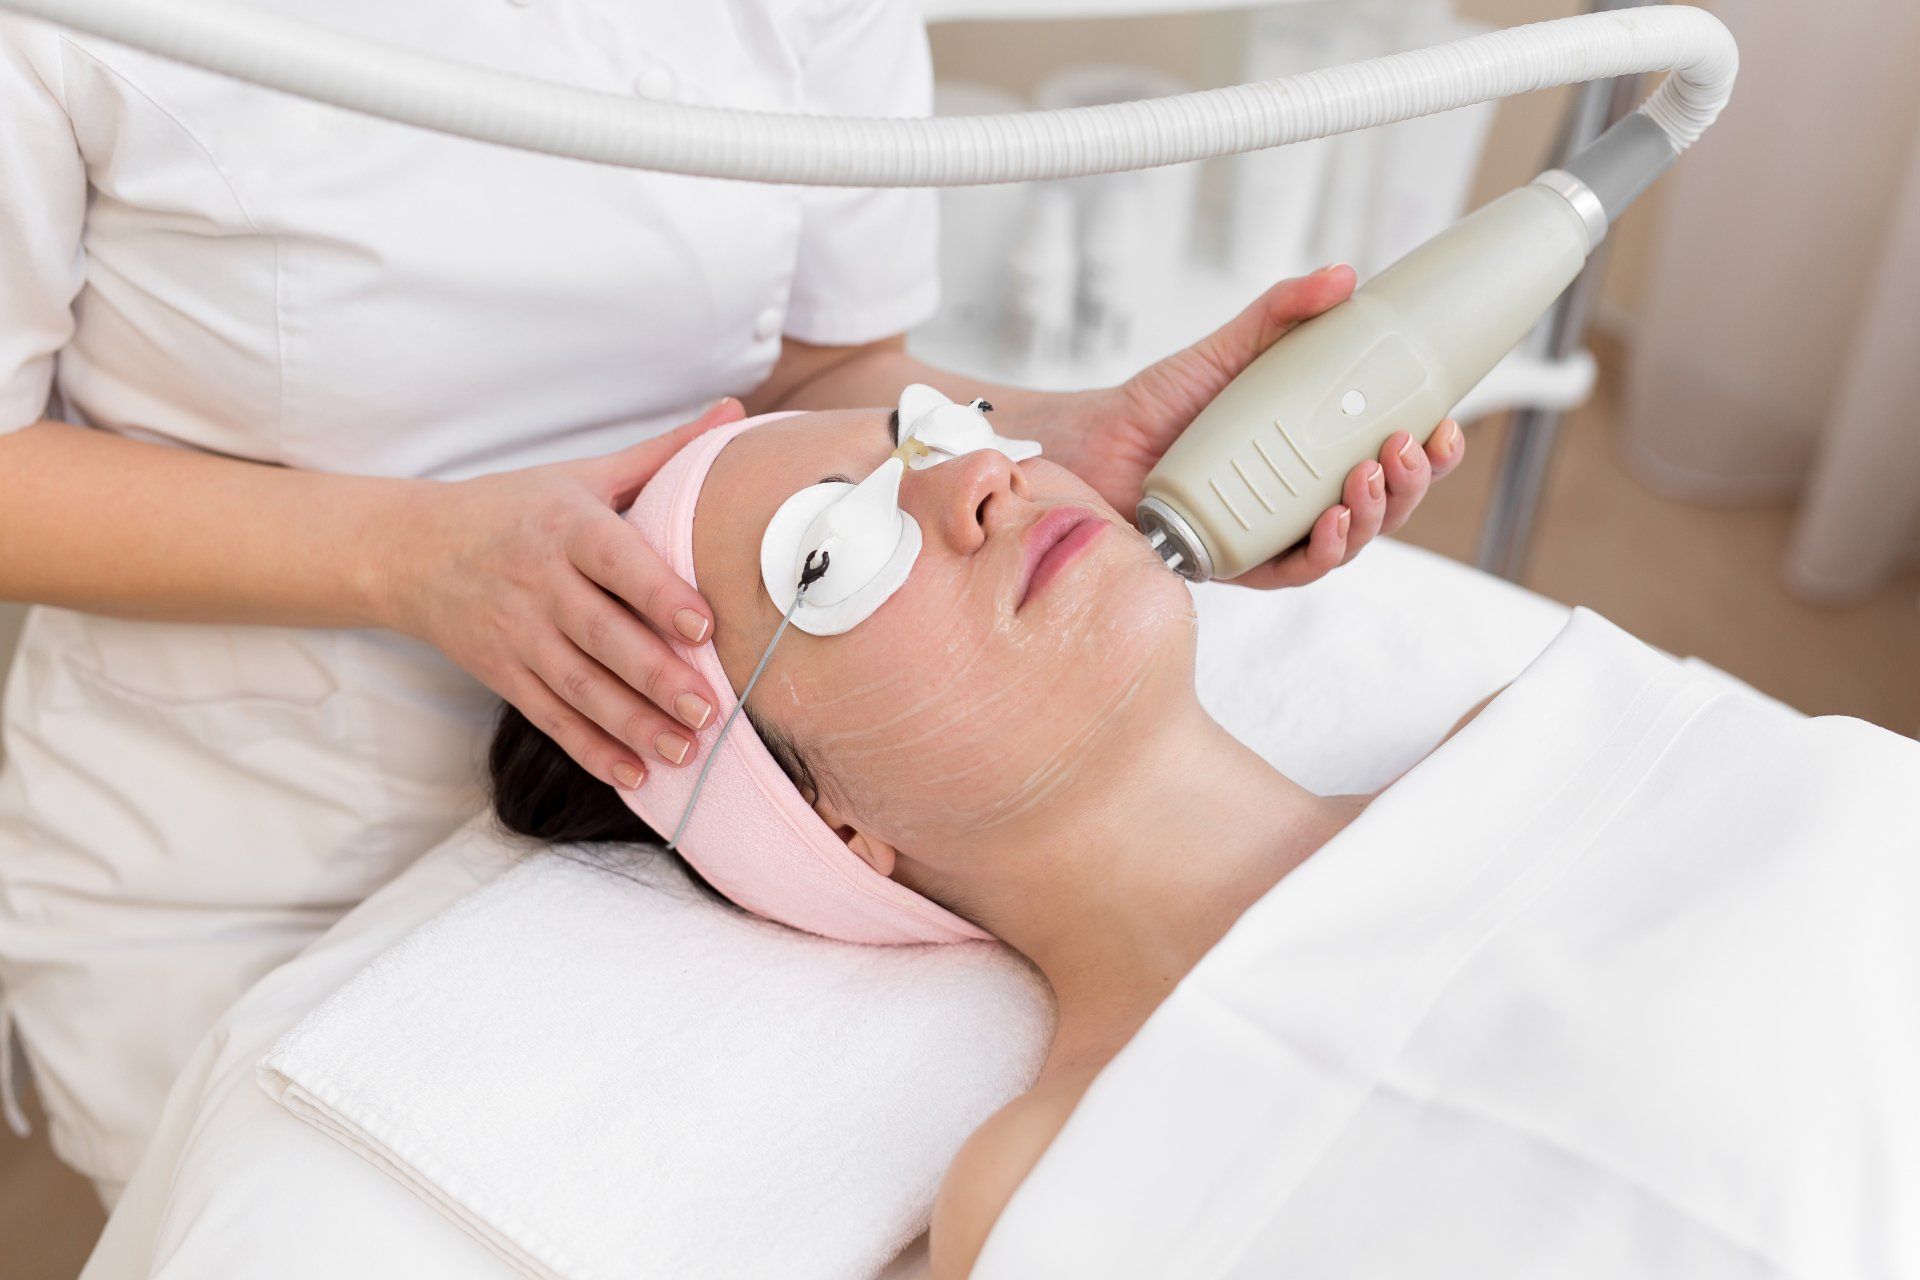 Medical aesthetician performs facial treatment on client who is wearing protective googles